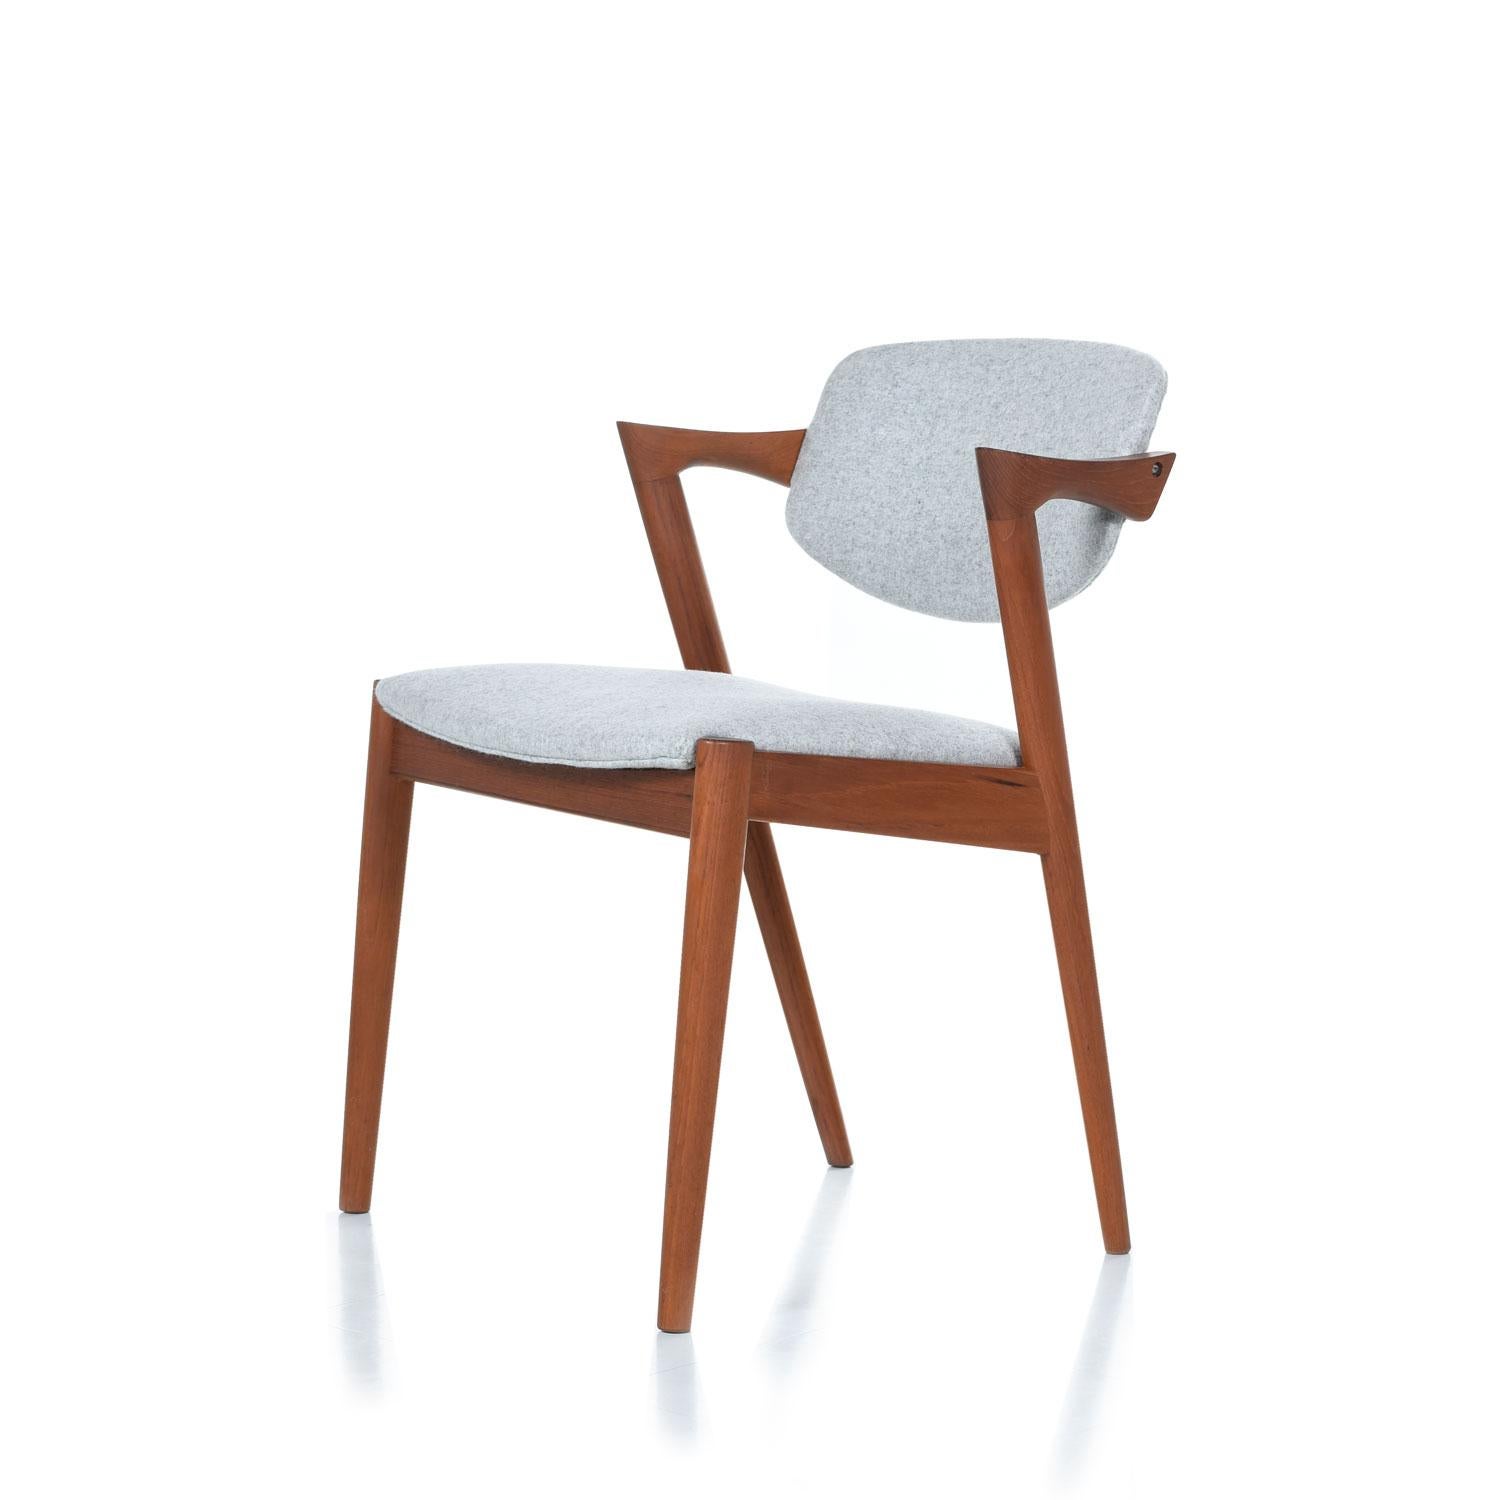 Feast your eyes on this beautifully restored Kai Kristiansen #49 chair. Sometimes referred to as the 